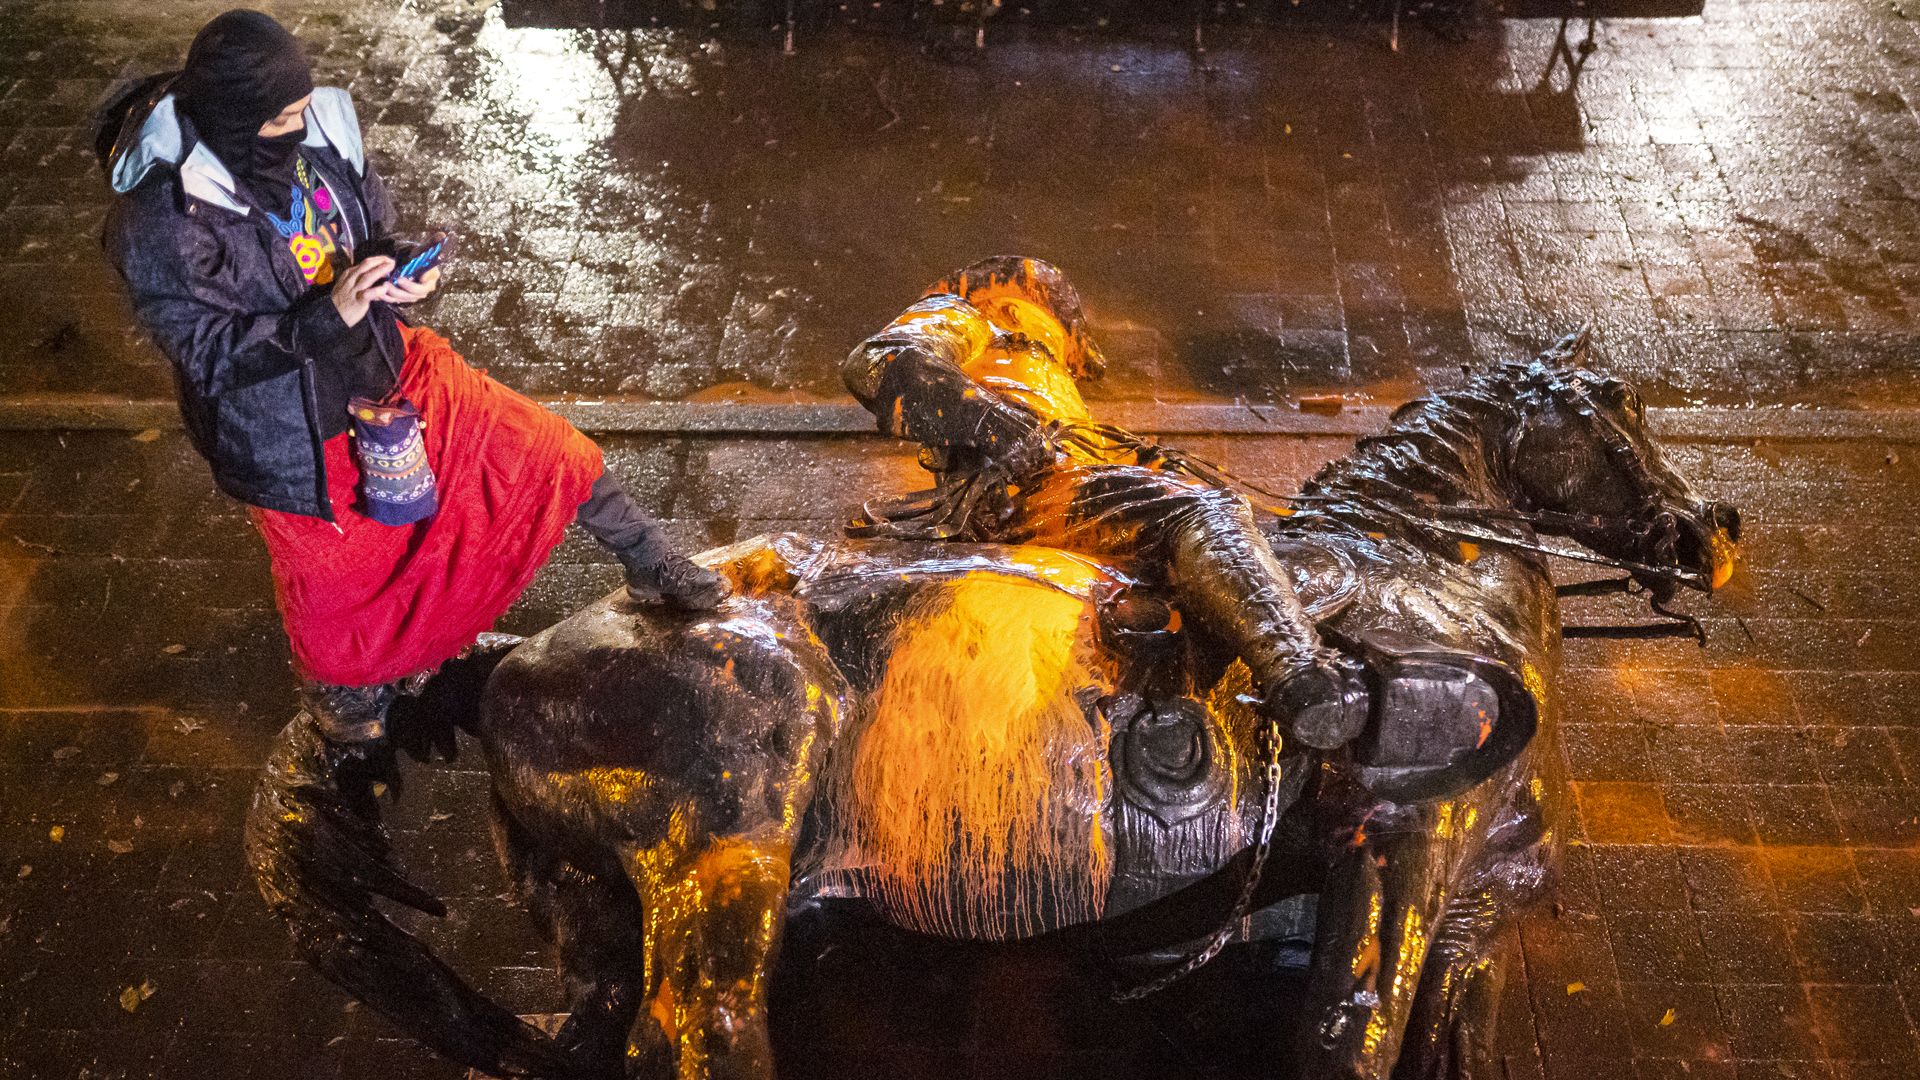 A protester stands over a toppled statue of President Theodore Roosevelt during an Indigenous Peoples Day of Rage protest on October 11, 2020 in Portland, Oregon.